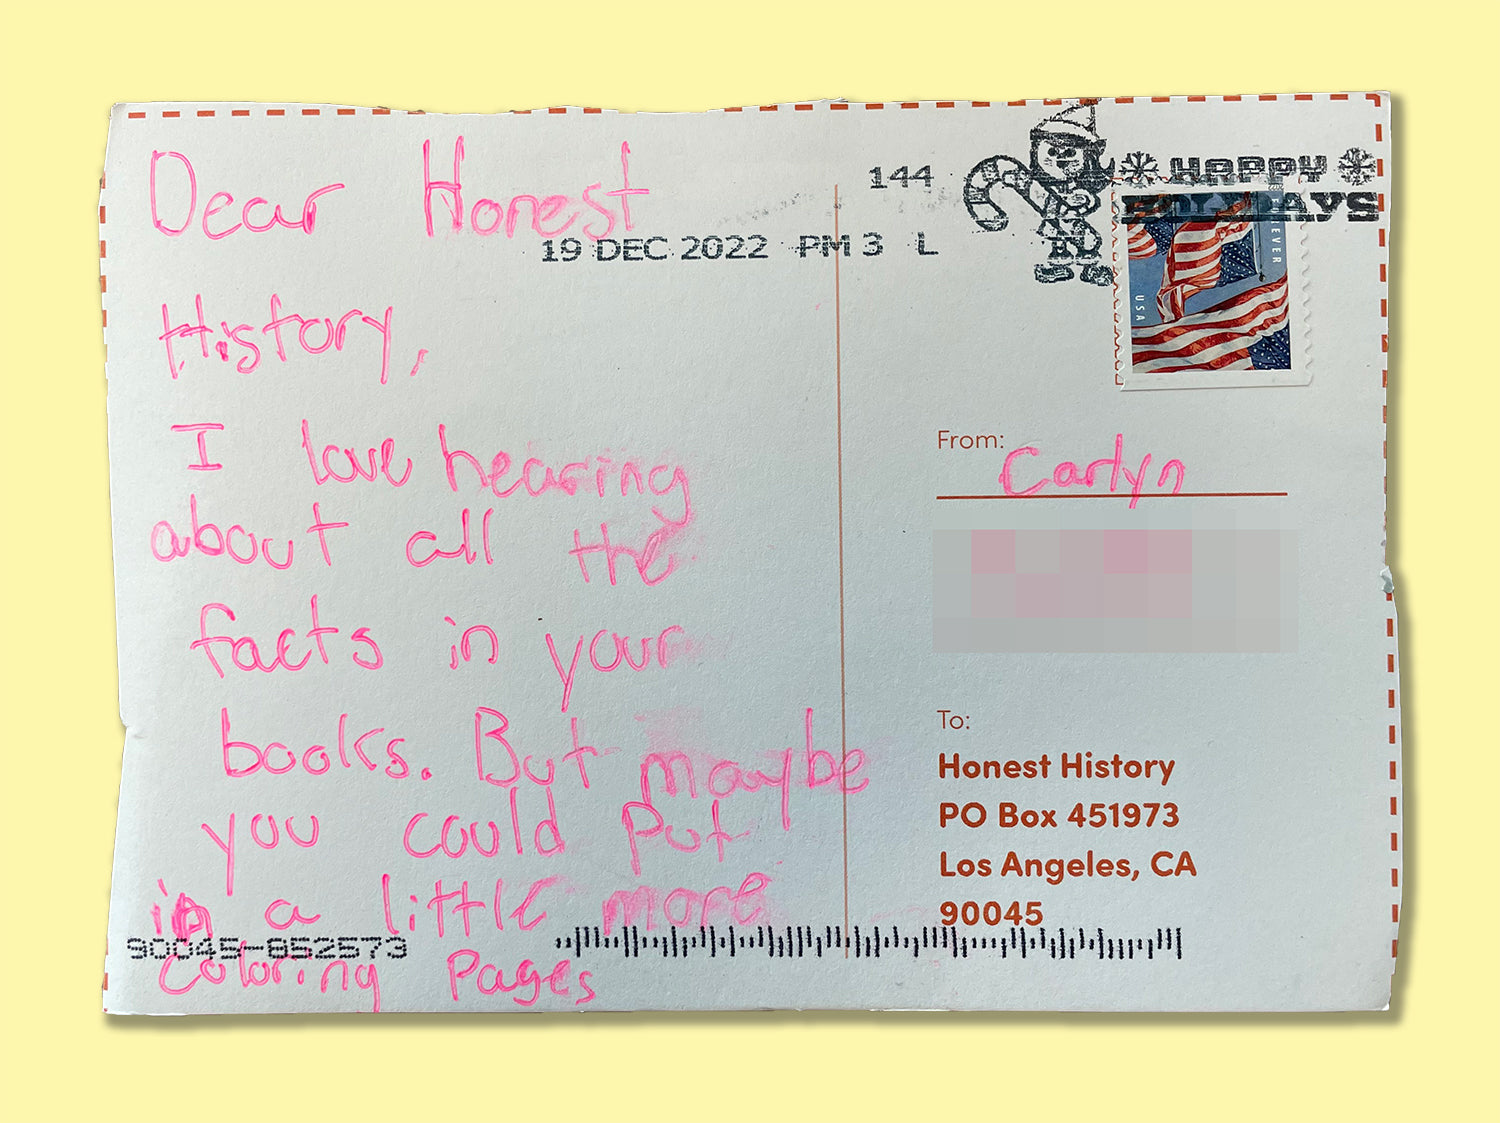 Postcard from Carlyn